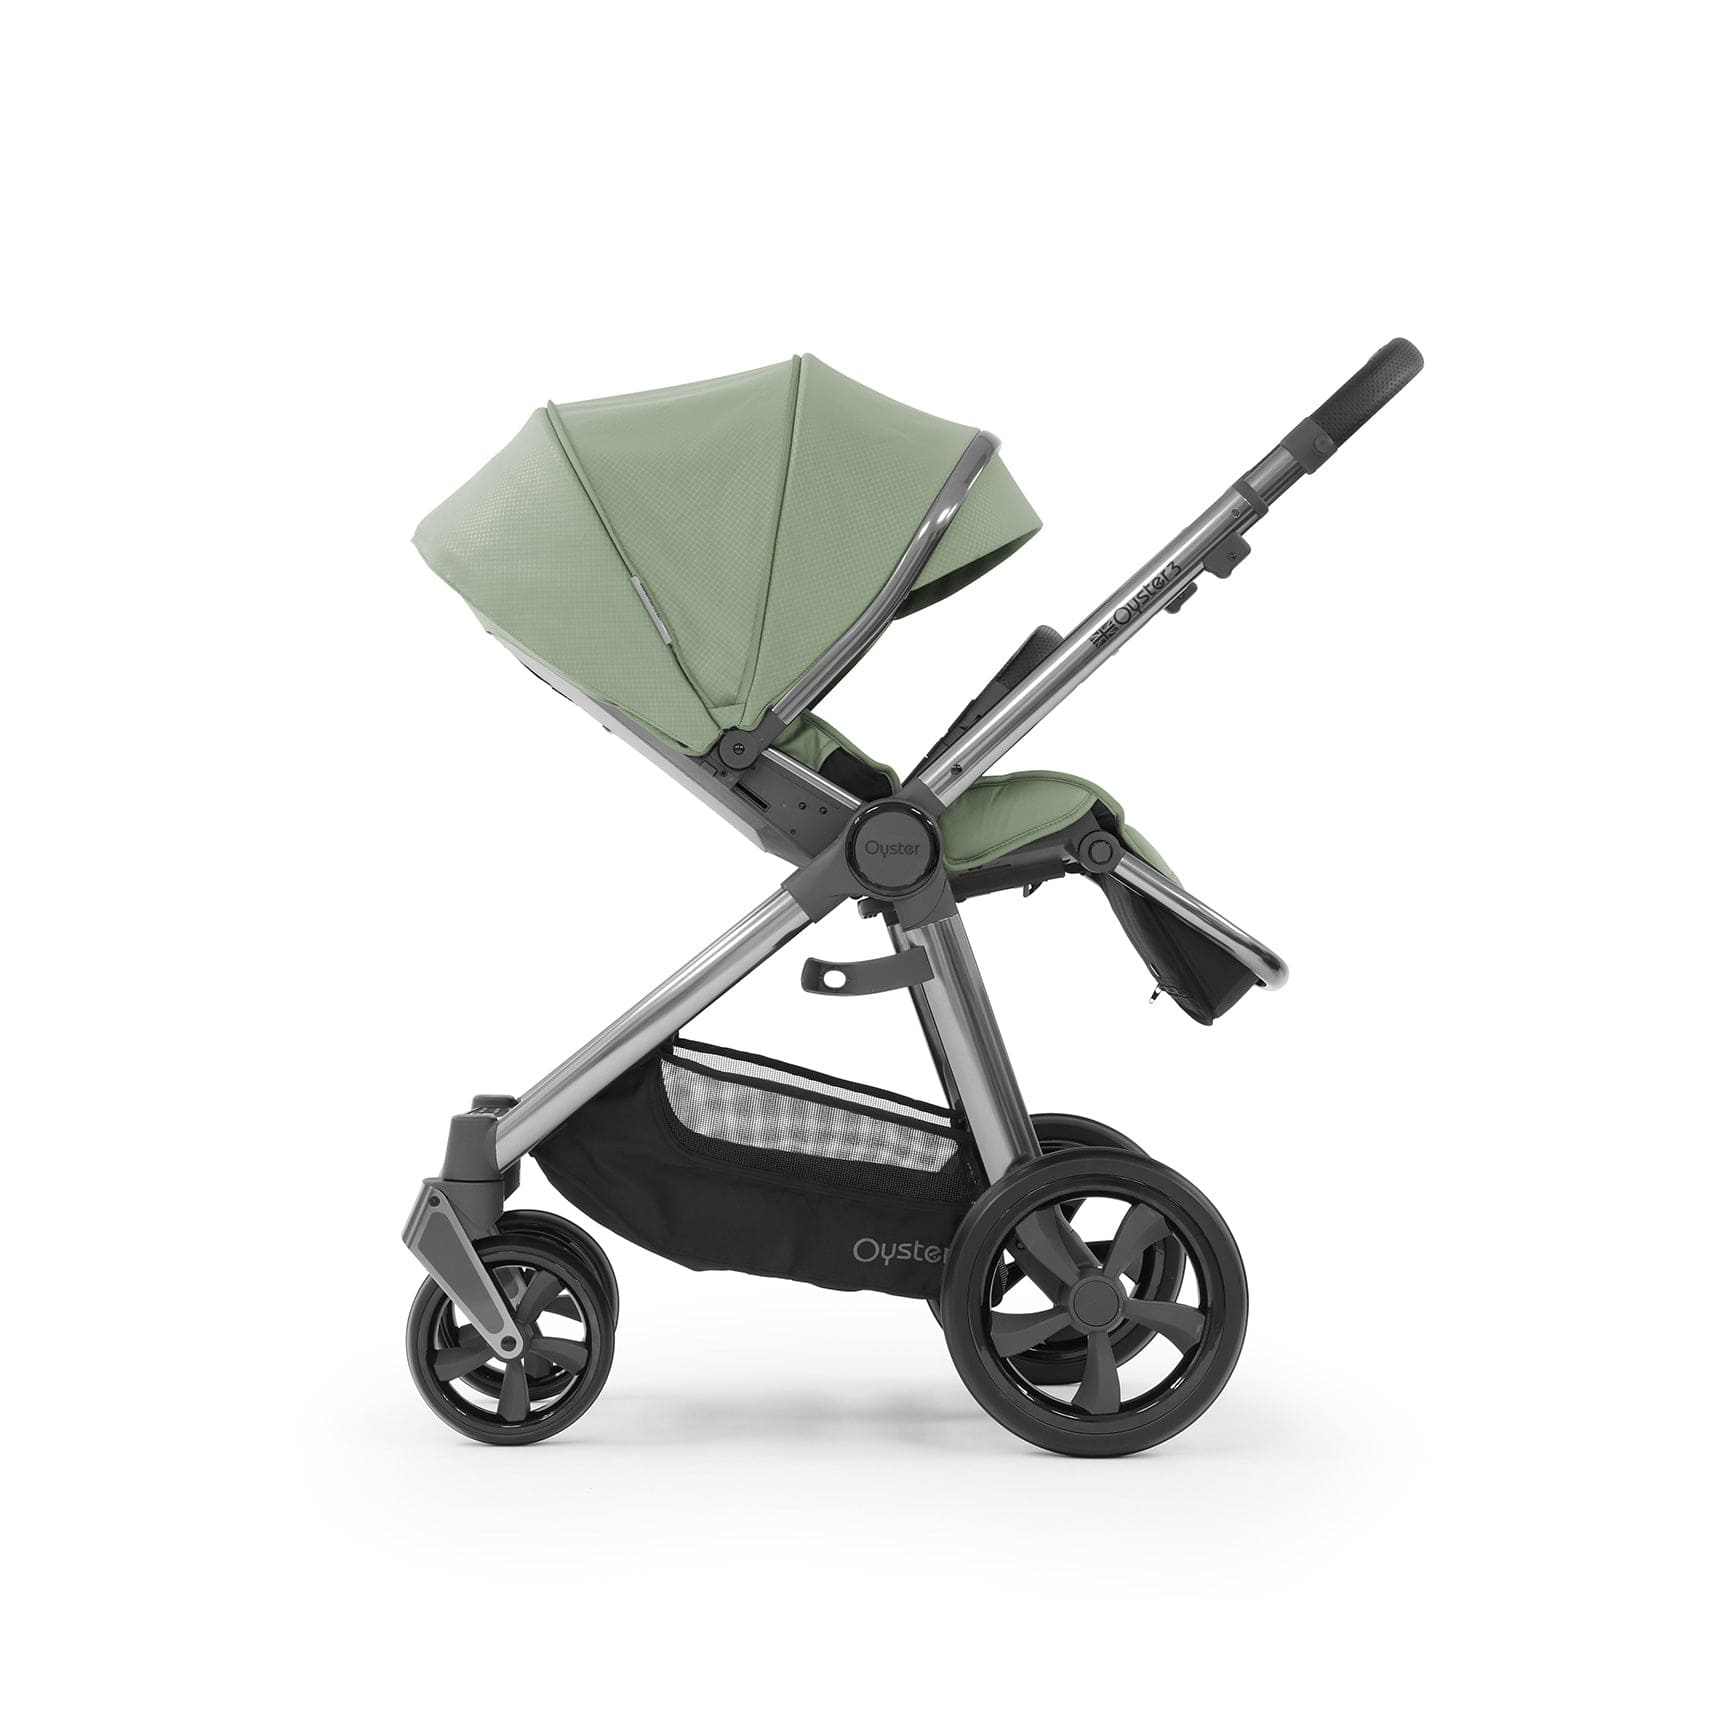 BabyStyle baby prams BabyStyle Oyster3 Pram & Carrycot Spearmint